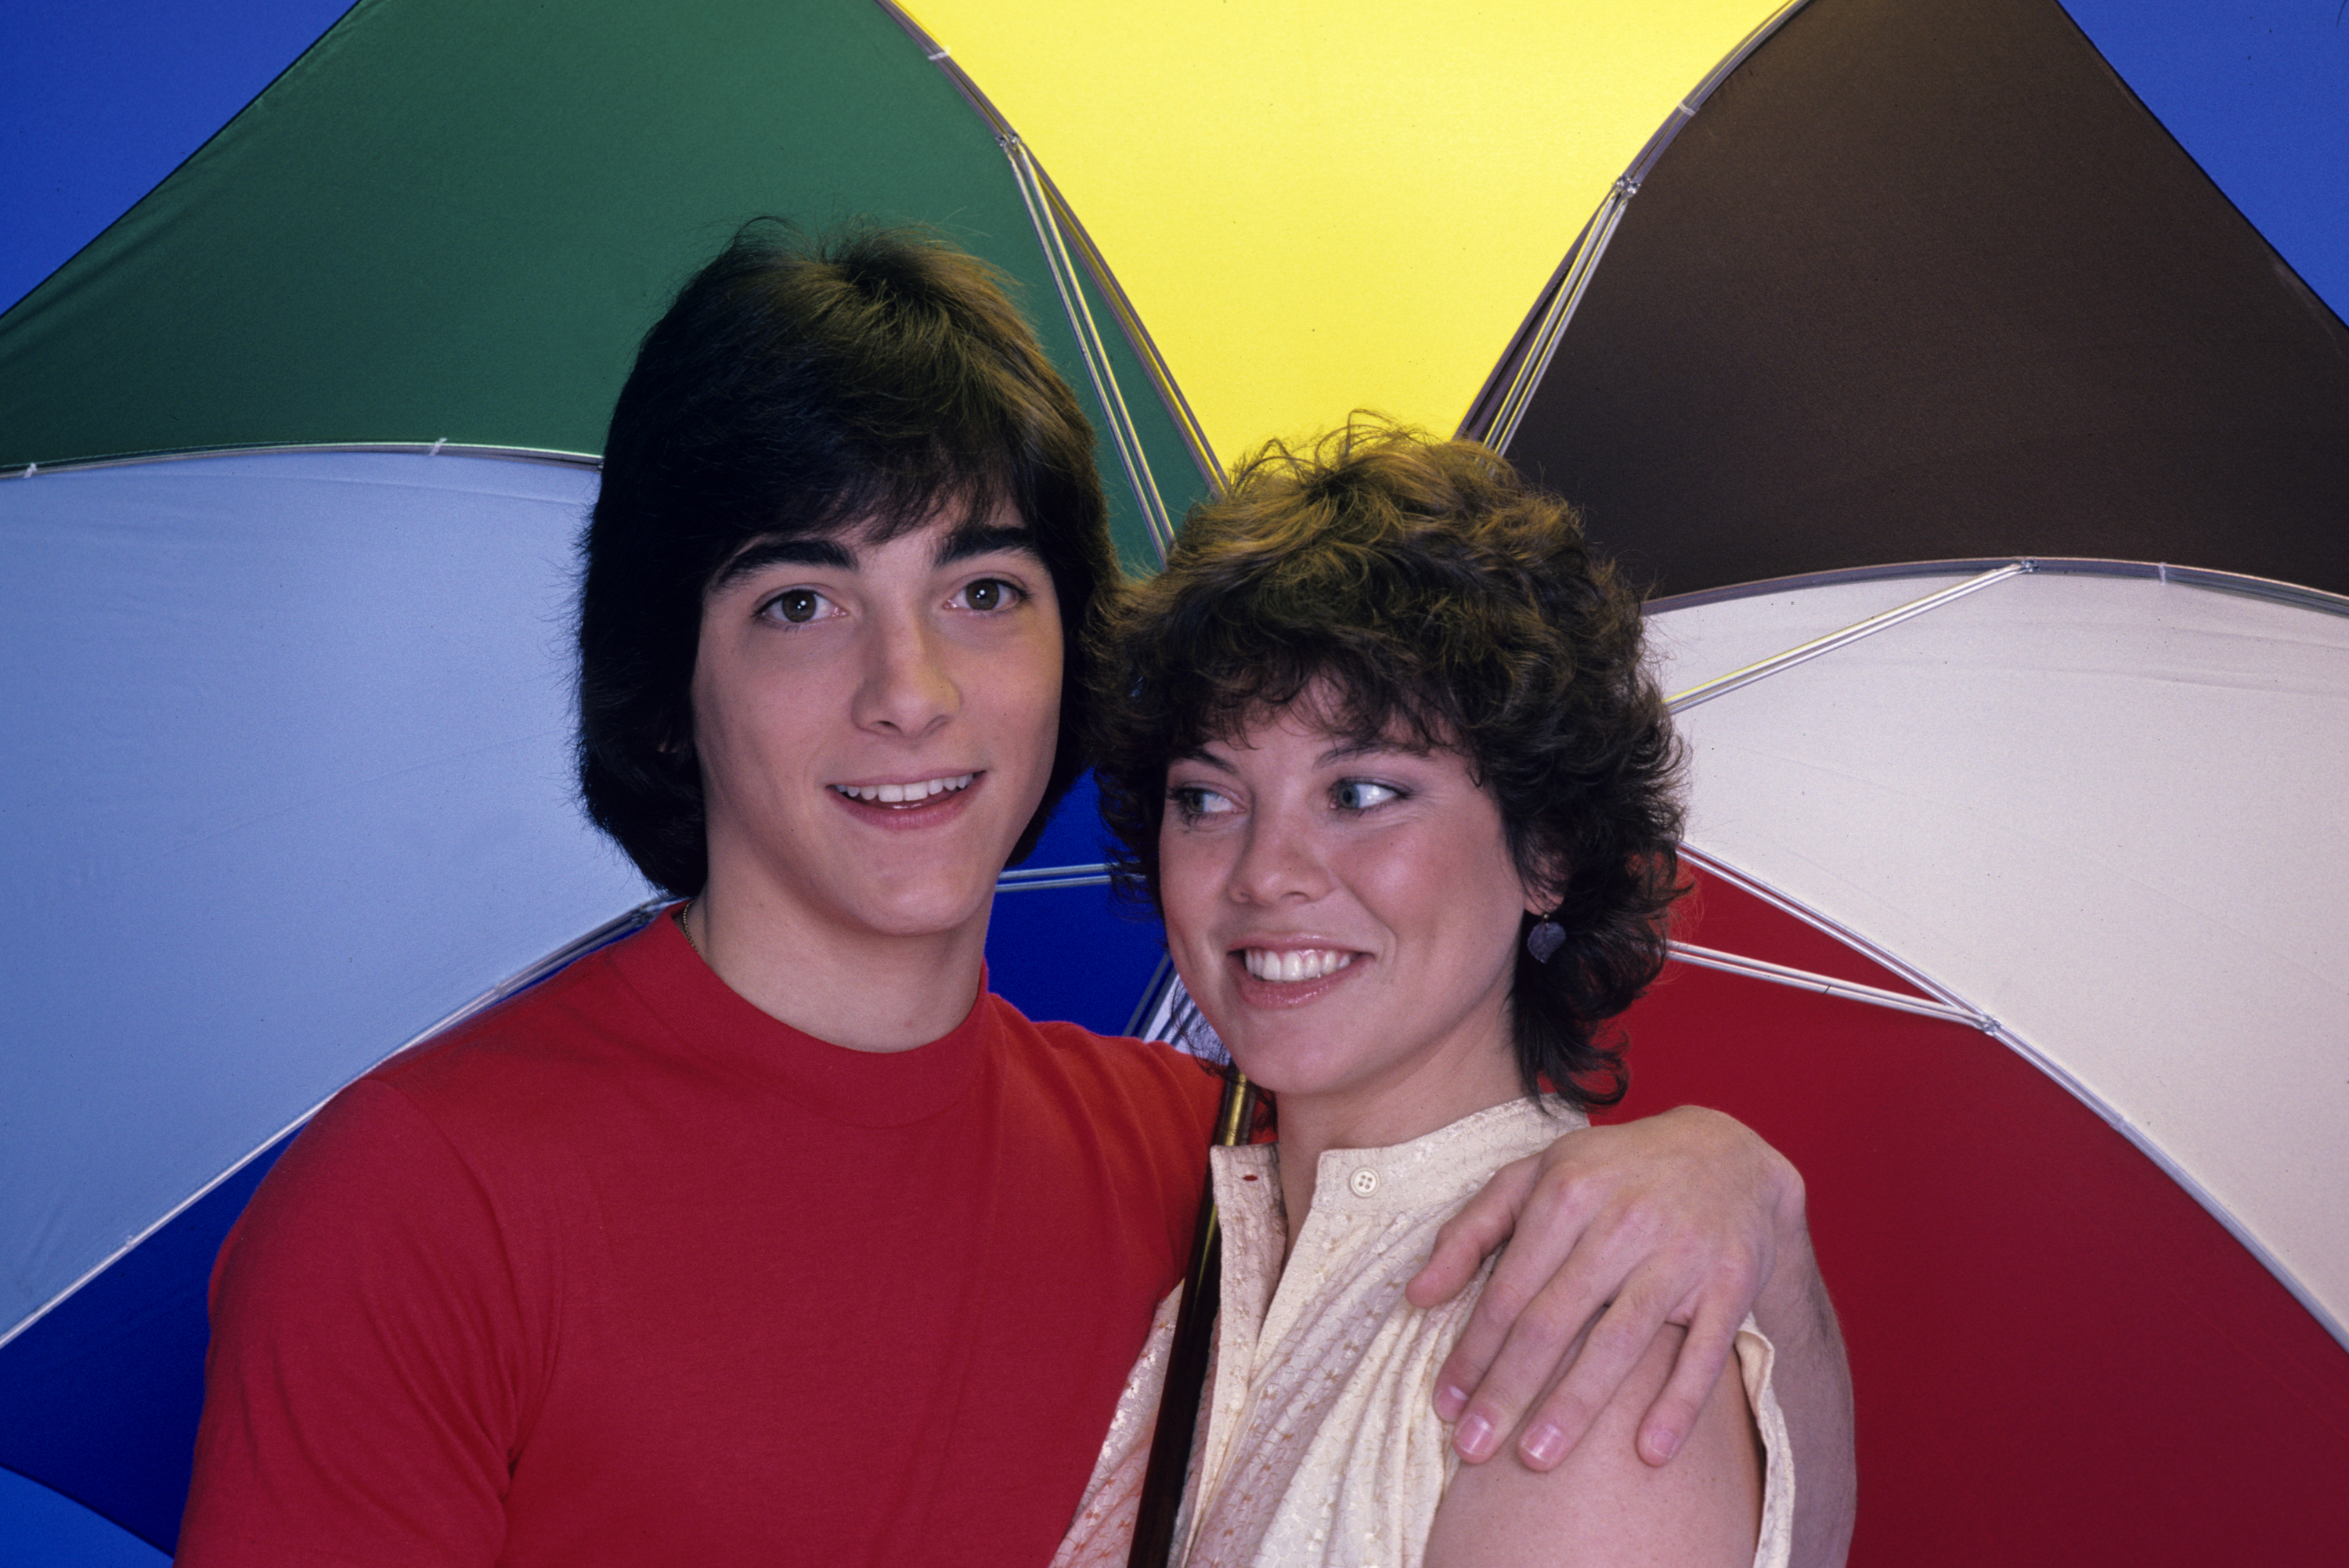 Scott Baio and Erin Moran on "Happy Days" in 1982 | Source: Getty Images